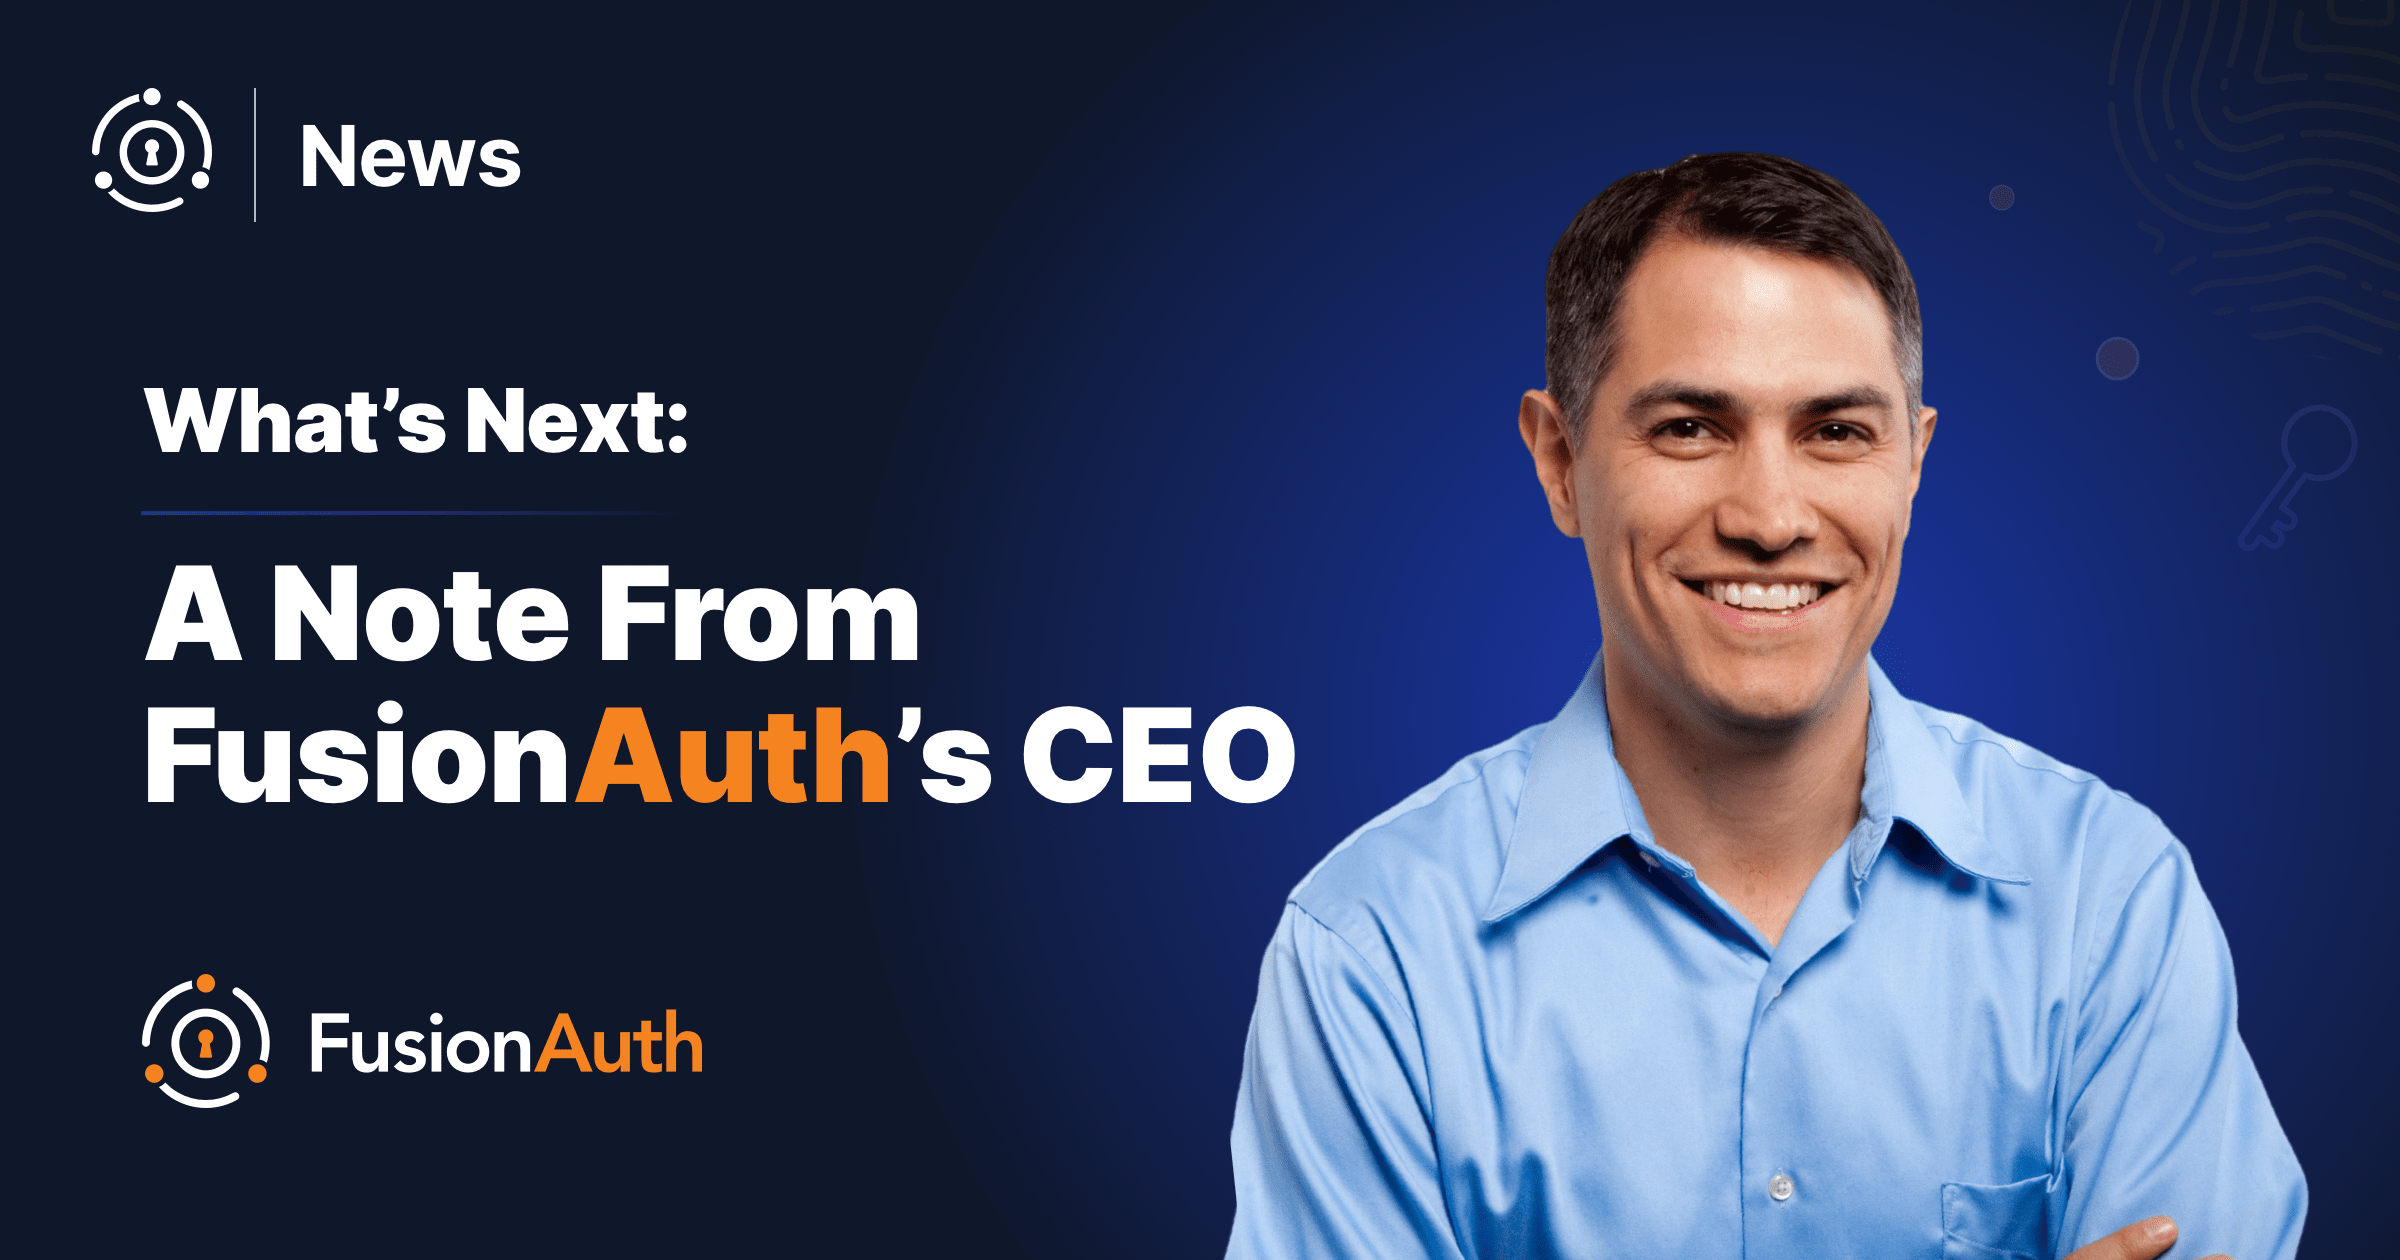 What’s Next - A Note From FusionAuth’s CEO